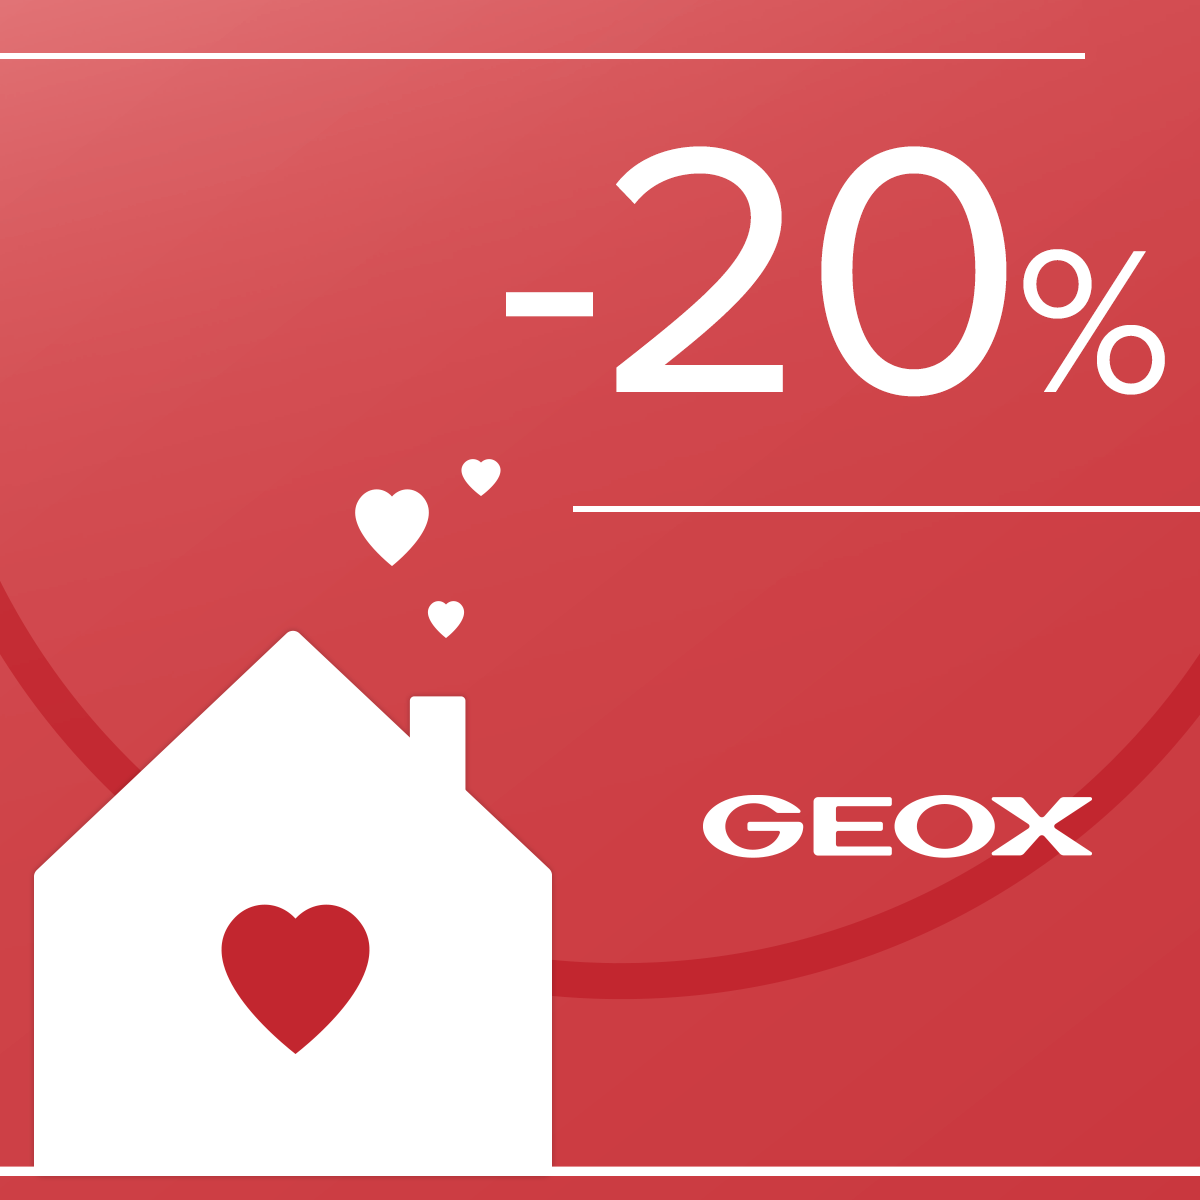 So Far yet So Near is not just a slogan: Geox is staying close to you with 20% Off and Free Delivery, wherever you are 🏠Let us worry about delivery! Discover more at bit.ly/GeoxWithYou